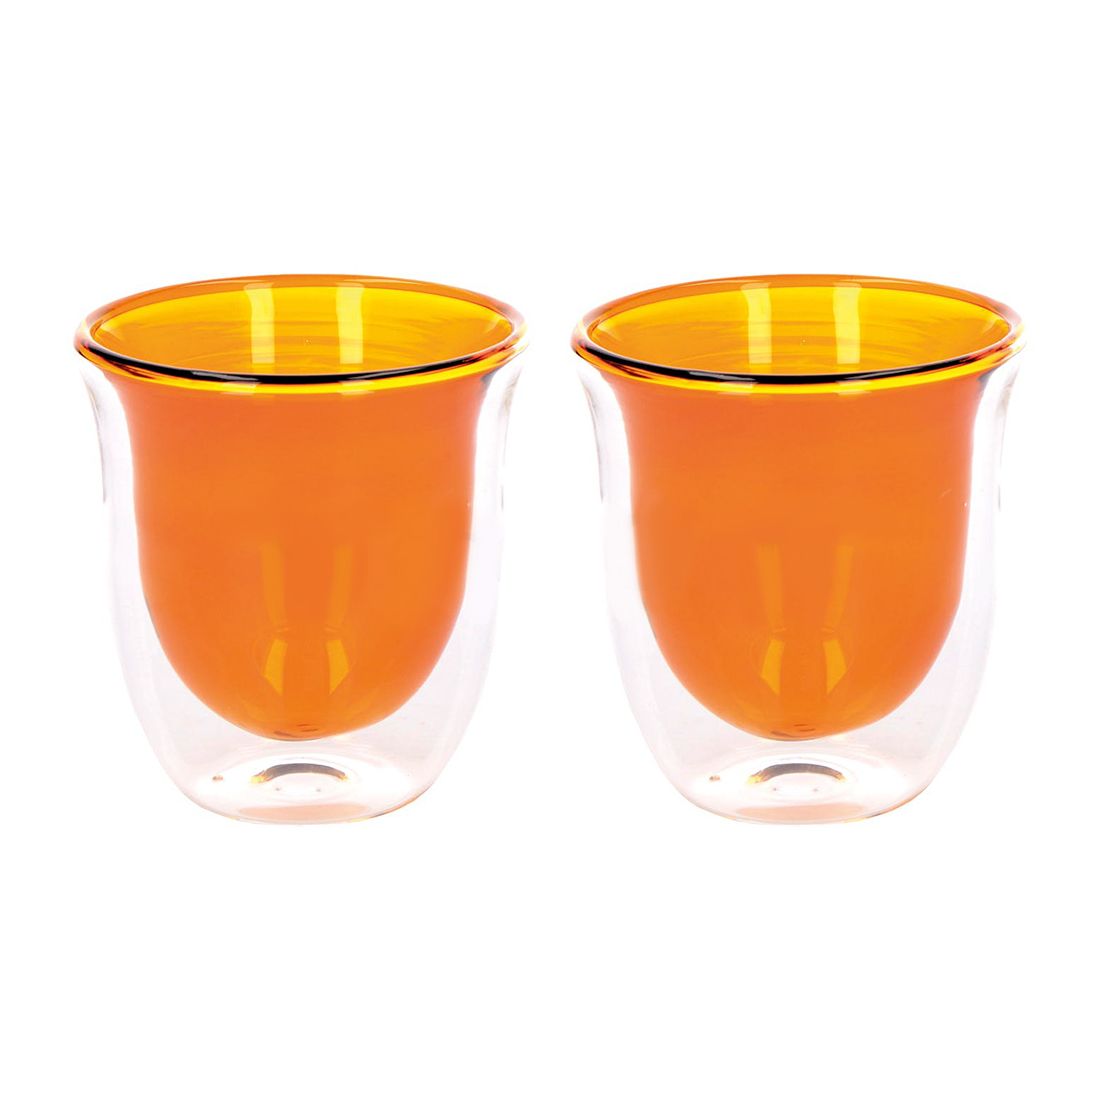 Kitchencraft L.A. Cafetiere Amber-Coloured Double Walled Glass 220ml Set of 2